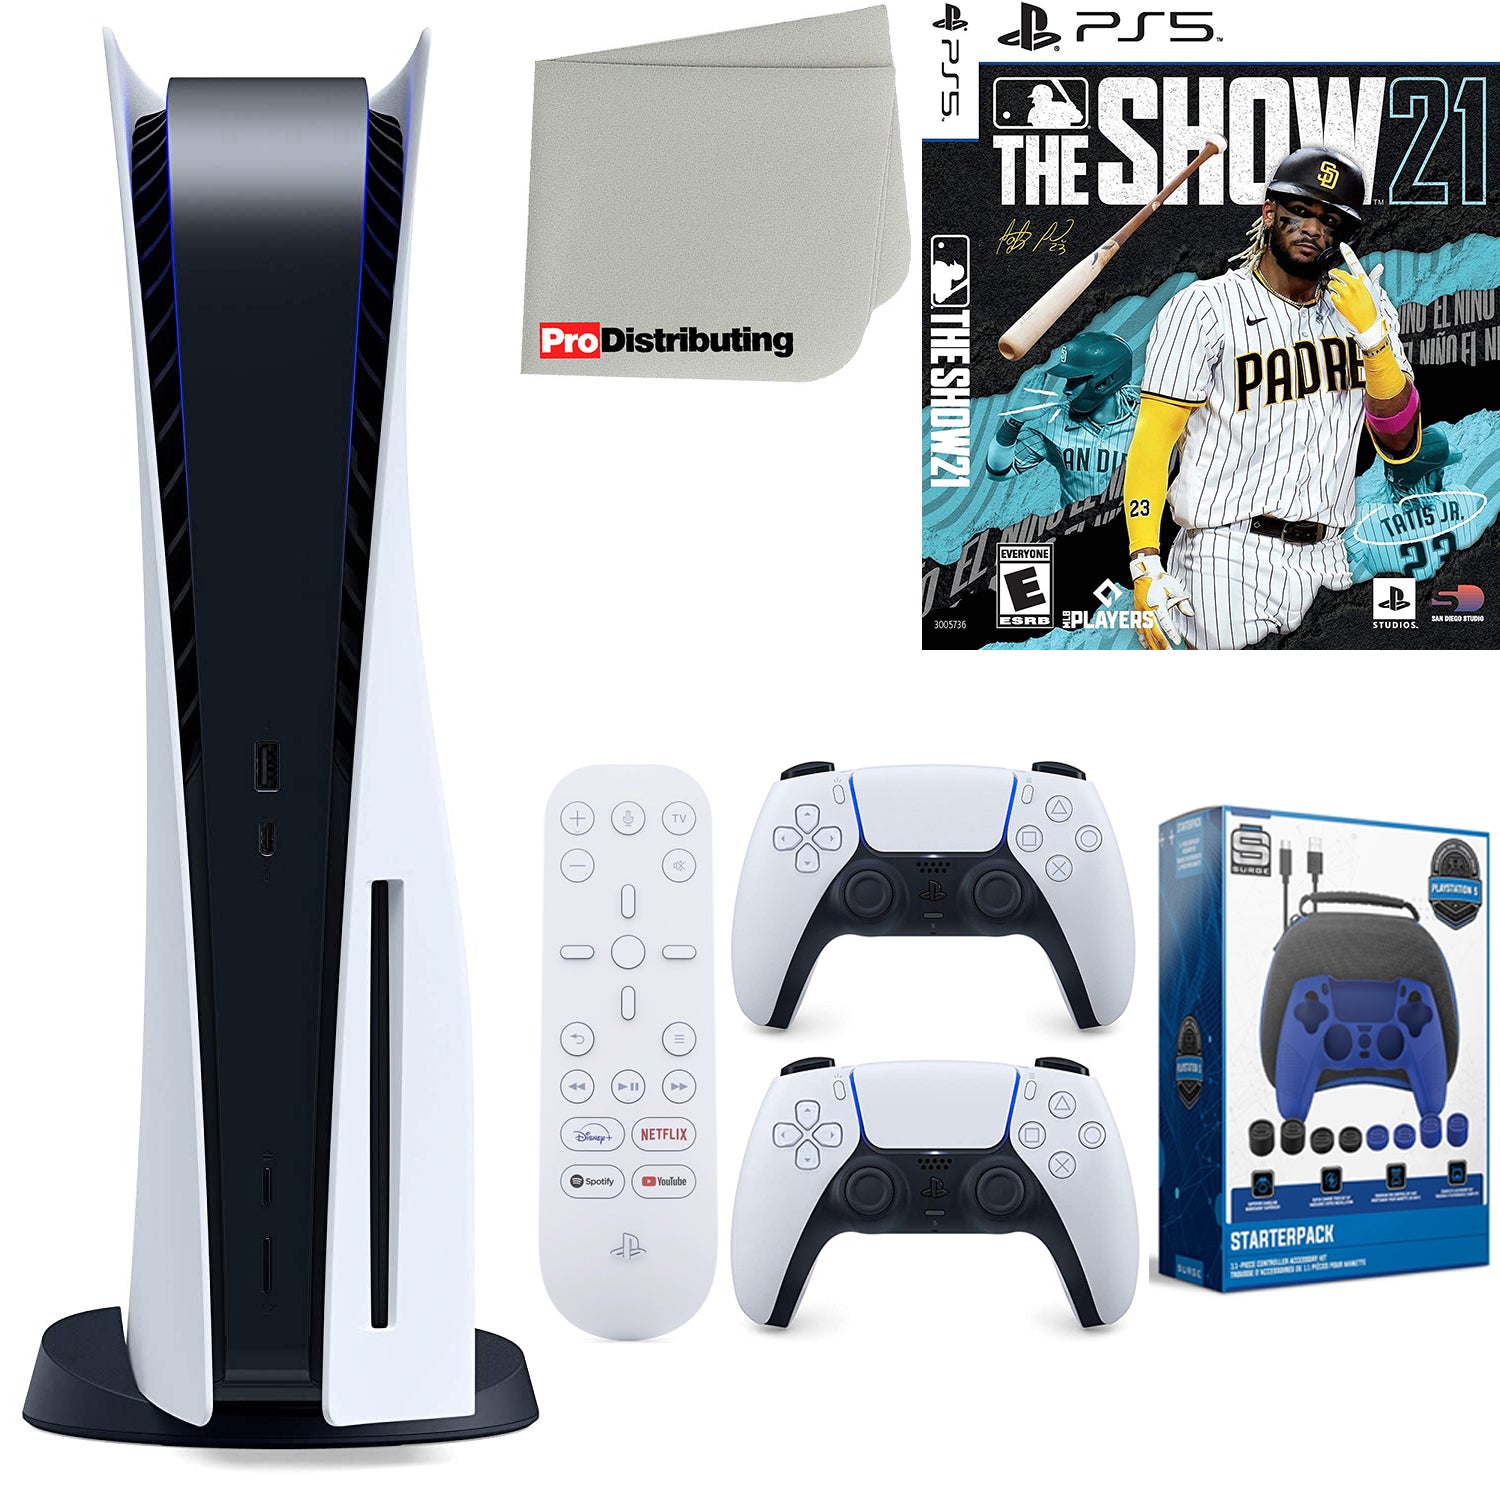 Sony Playstation 5 Disc Version (Sony PS5 Disc) with White Extra Controller, Media Remote, MLB The Show 21, Accessory Starter Kit and Microfiber Cleaning Cloth Bundle - Pro-Distributing